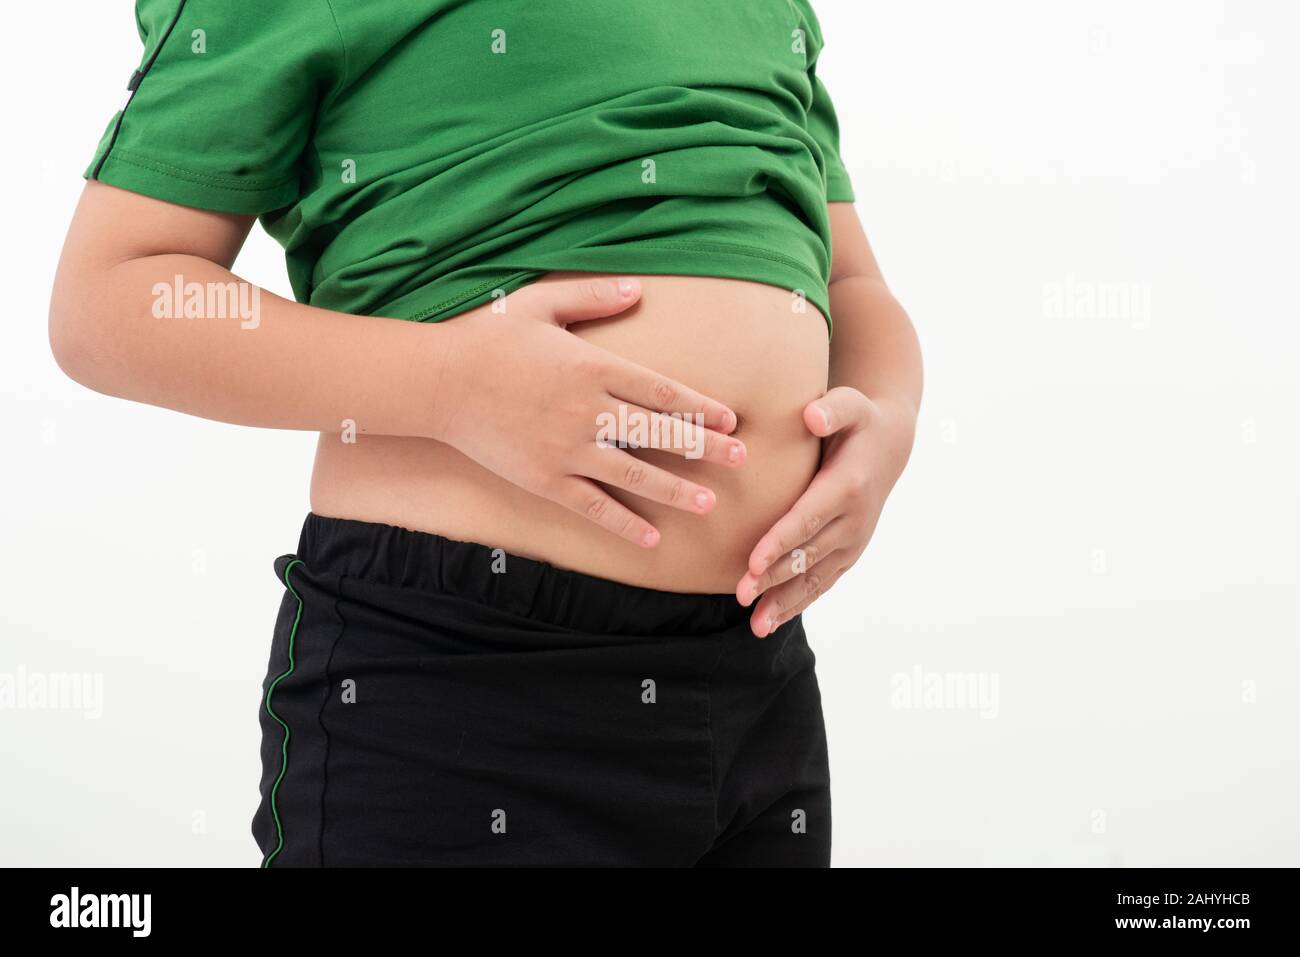 Asian little boy with stomach ache, child holding his hands on his belly. Stomach ache child stock image. Stock Photo